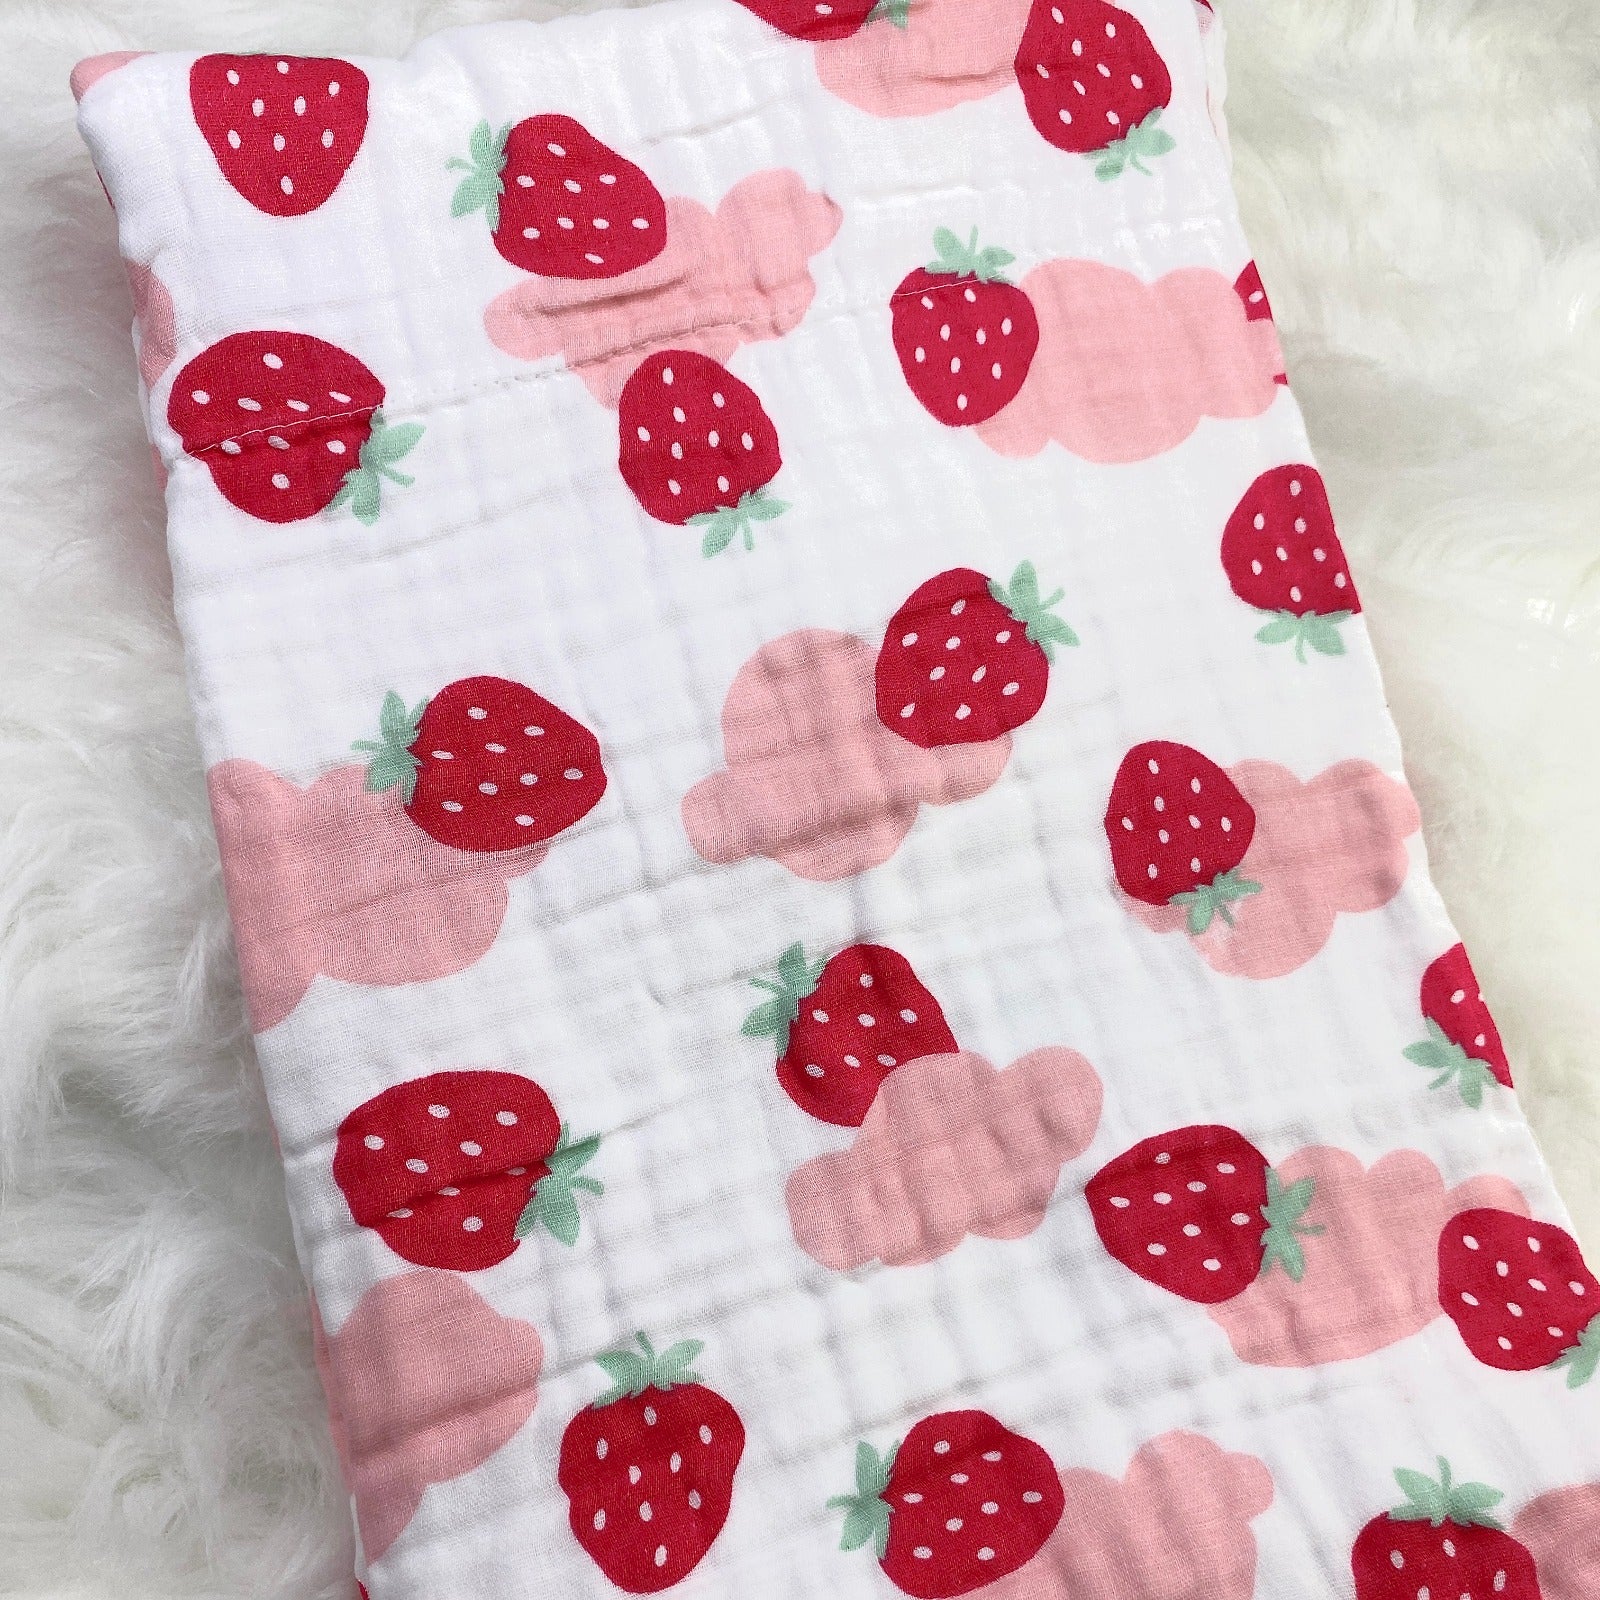 A large muslin baby blanket, made from bamboo and cotton fibres. This blanket is perfect for a baby nursery or out and about in a buggy. The blanket features a cute pink cloud and strawberries pattern.